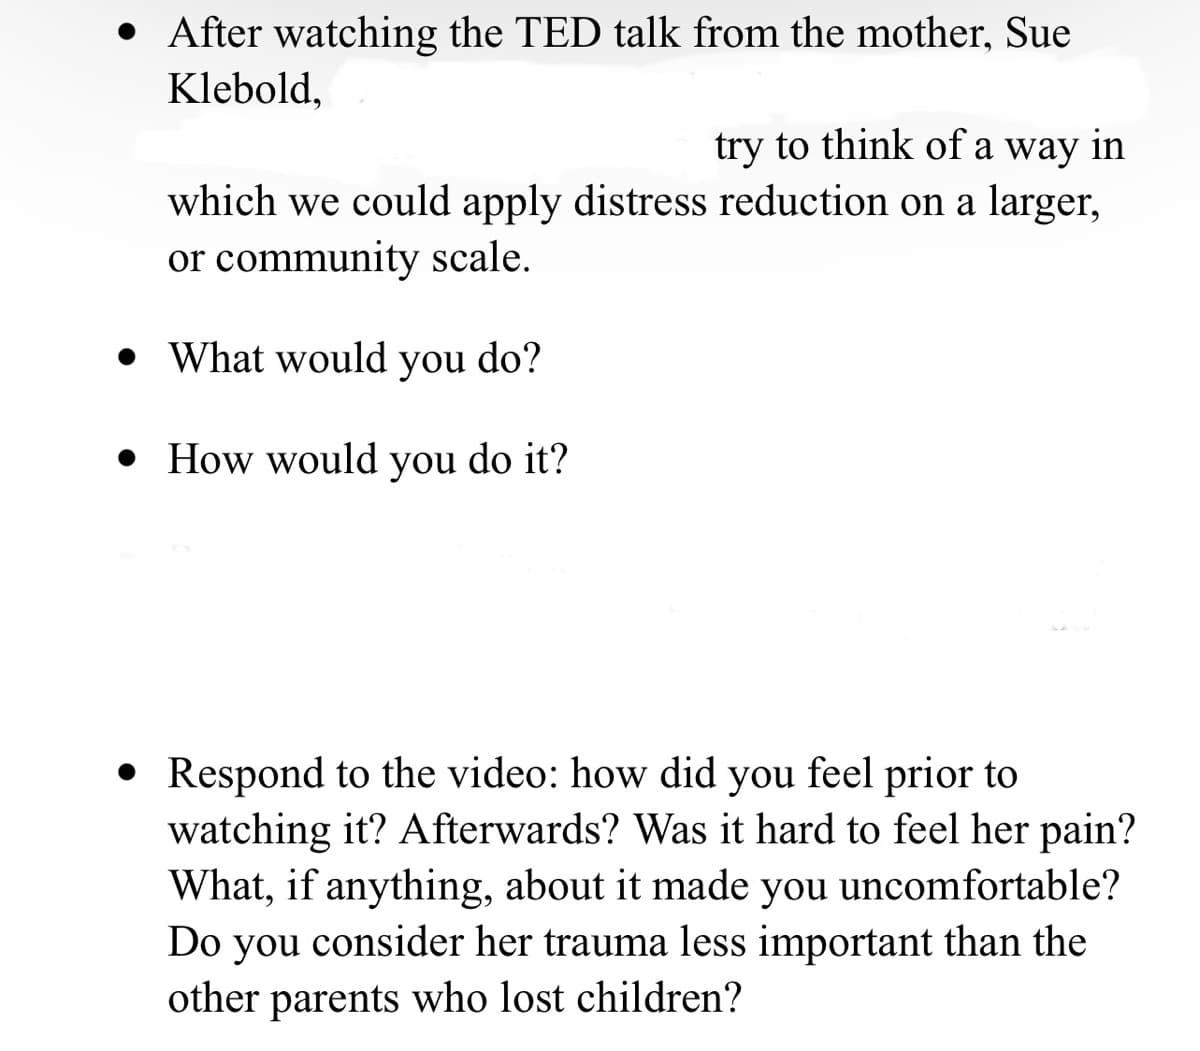 • After watching the TED talk from the mother, Sue
Klebold,
try to think of a way in
which we could apply distress reduction on a larger,
or community scale.
• What would you do?
• How would you do it?
• Respond to the video: how did you feel prior to
watching it? Afterwards? Was it hard to feel her pain?
What, if anything, about it made you uncomfortable?
Do you consider her trauma less important than the
other parents who lost children?